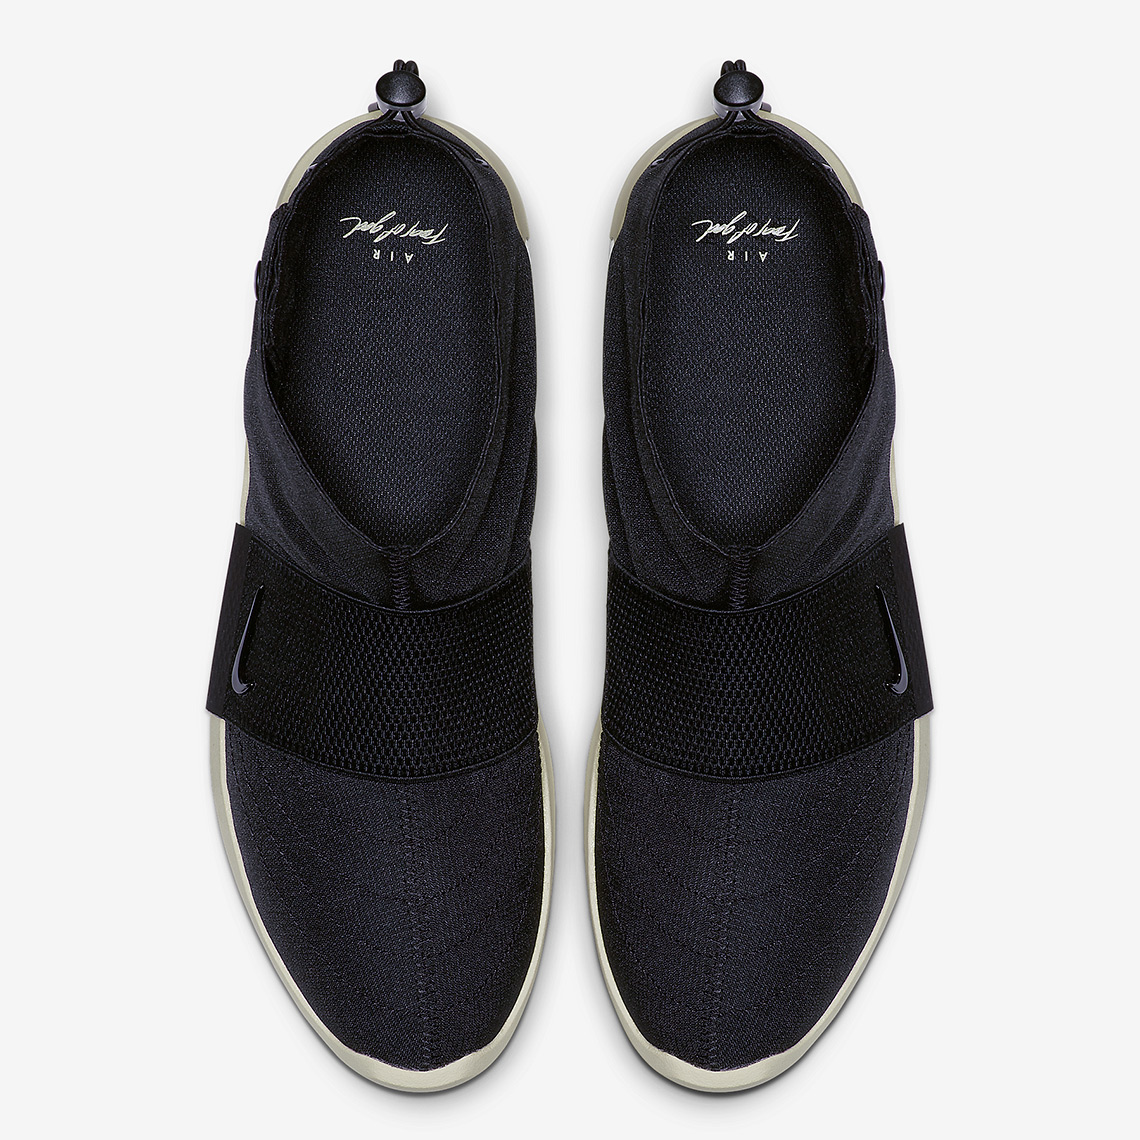 nike air fear of god moccasin at8086 002 1